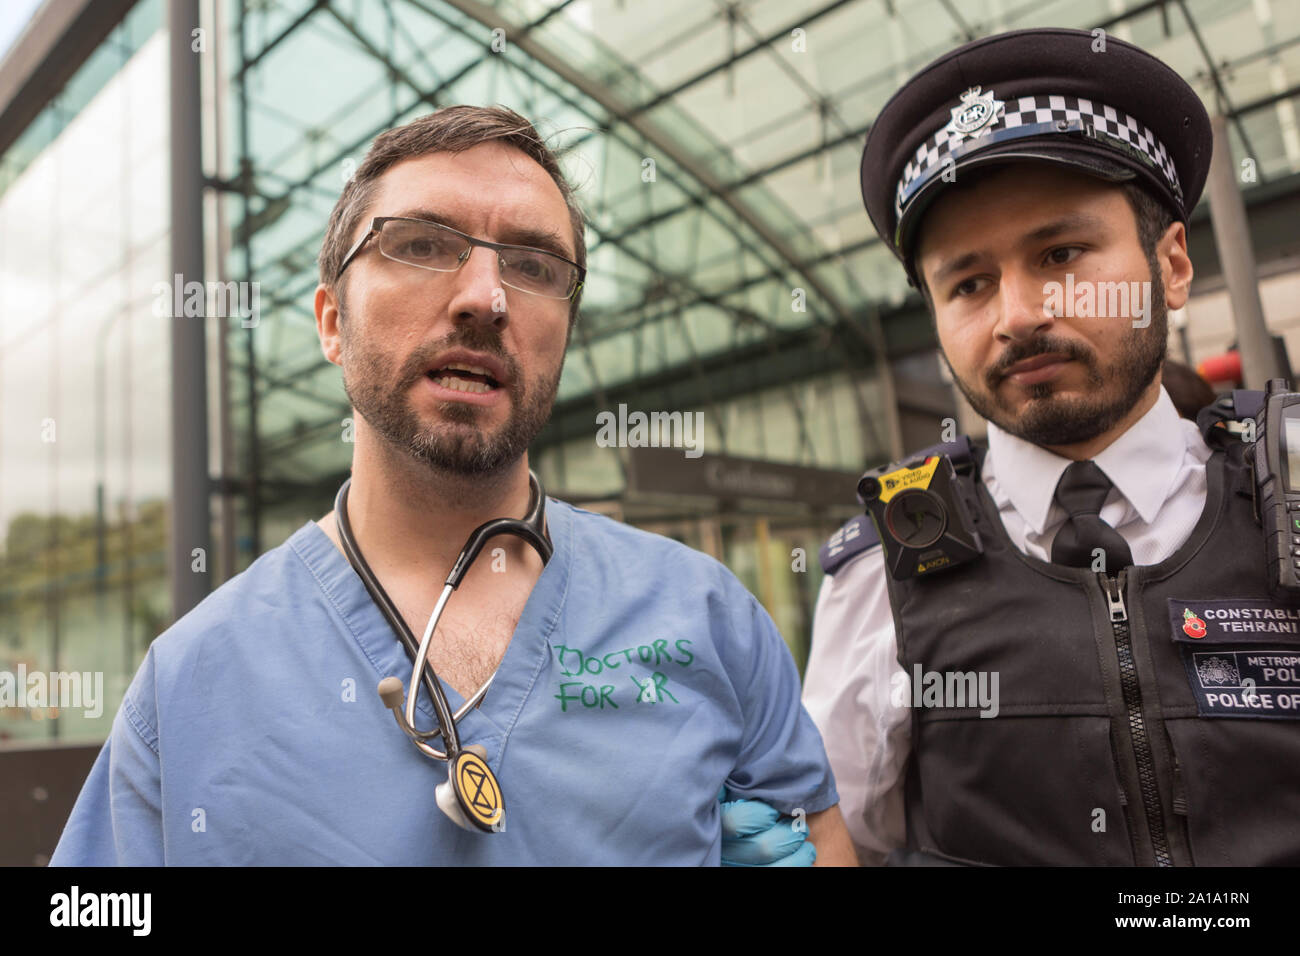 London, UK. 25th Sep, 2019. Doctors from the NHS representing environmental campaign group Extinction Rebellion, super glue themselves to the entrance outside the Department for Business, Energy and Industrial Strategy, Victoria Street, Westminster. Credit: Penelope Barritt/Alamy Live News Stock Photo